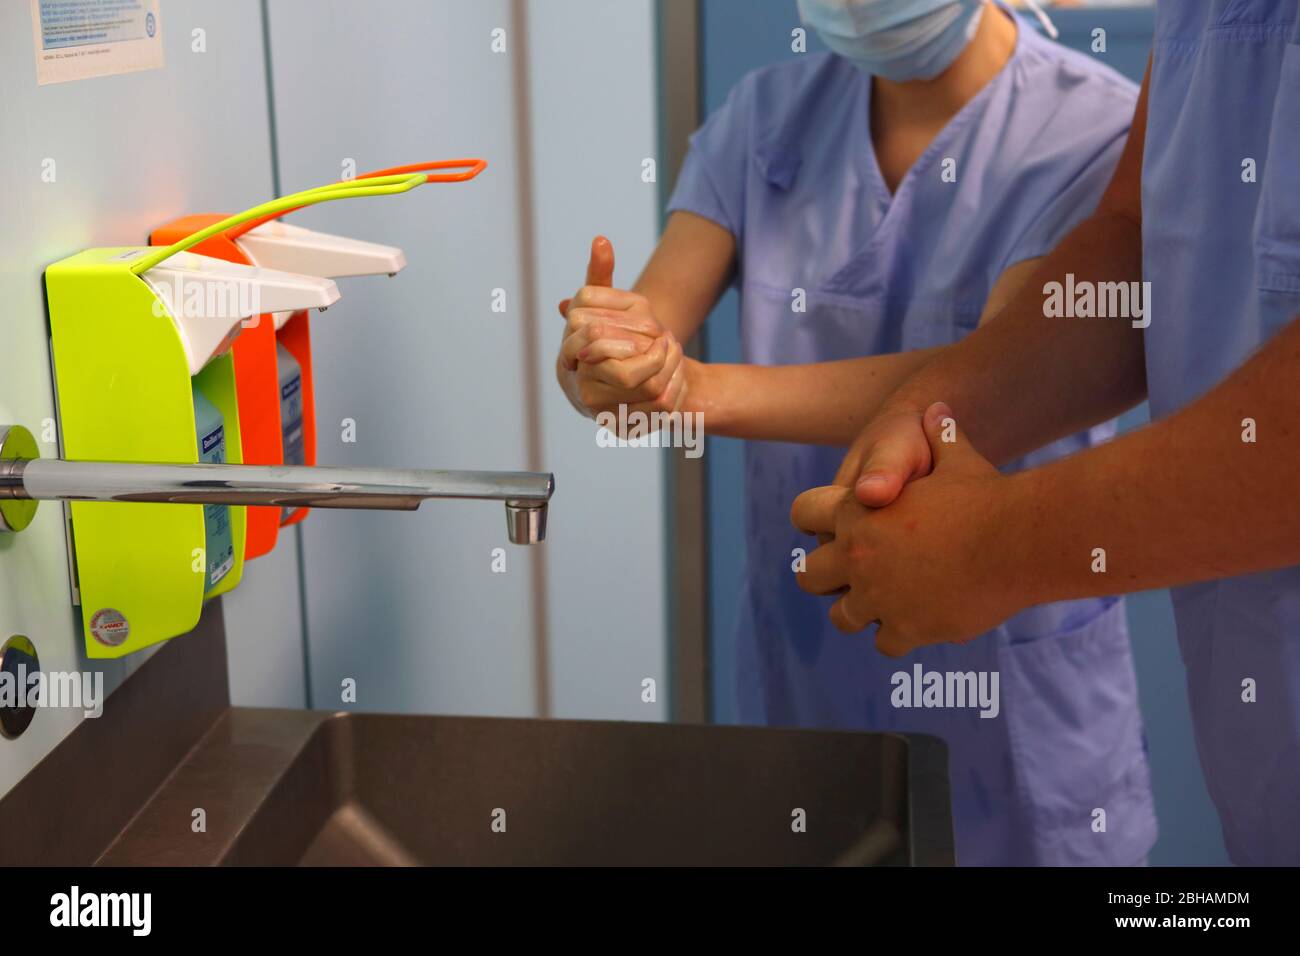 Disinfection of the hands before surgery, Czech Republic Stock Photo